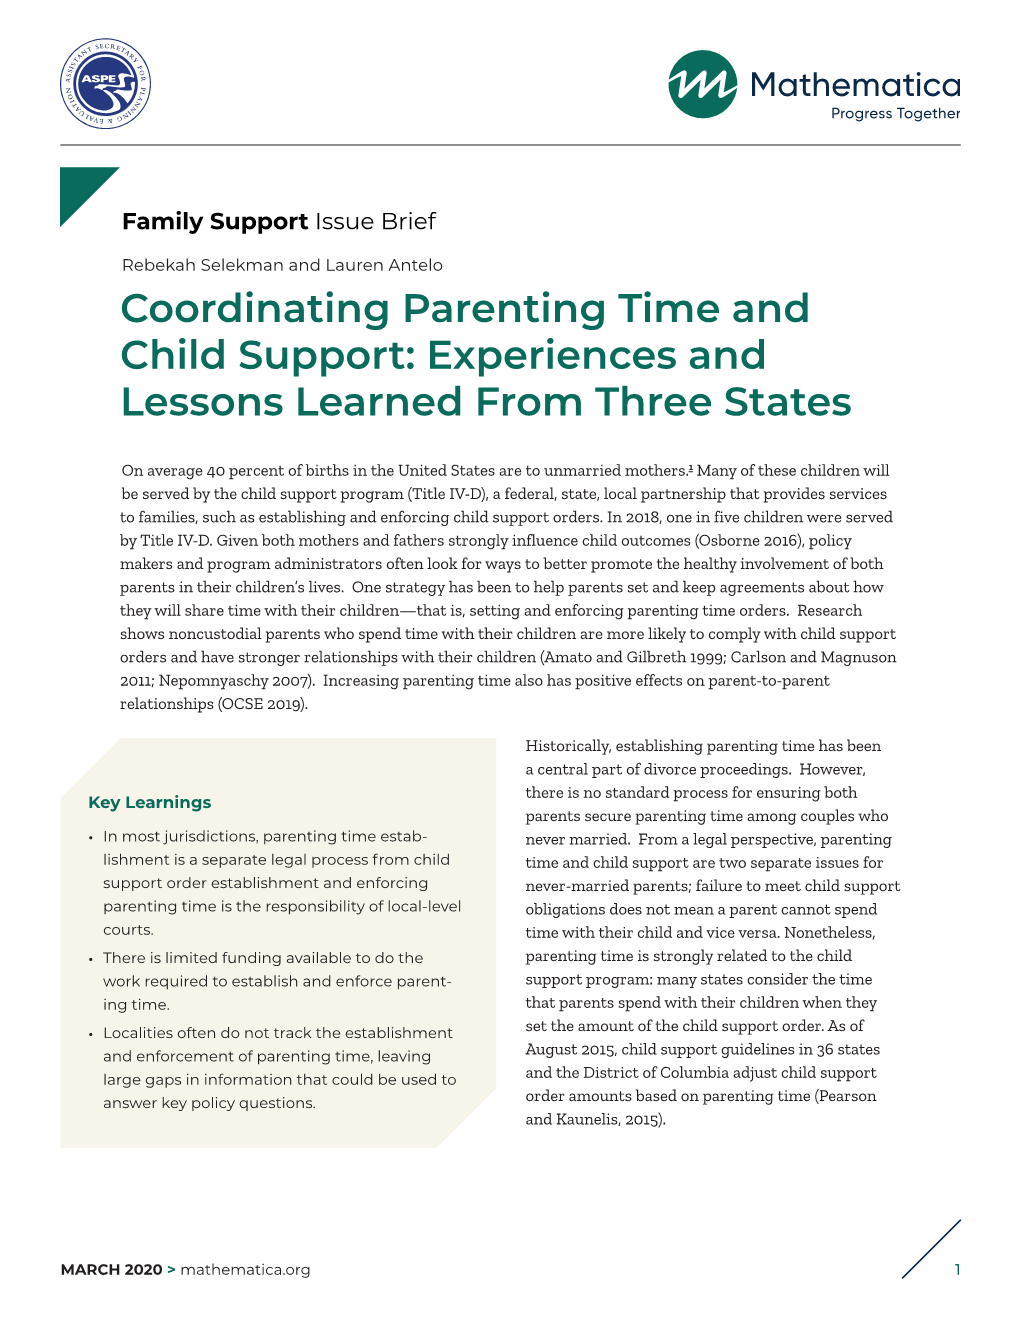 Coordinating Parenting Time and Child Support: Experiences and Lessons Learned from Three States